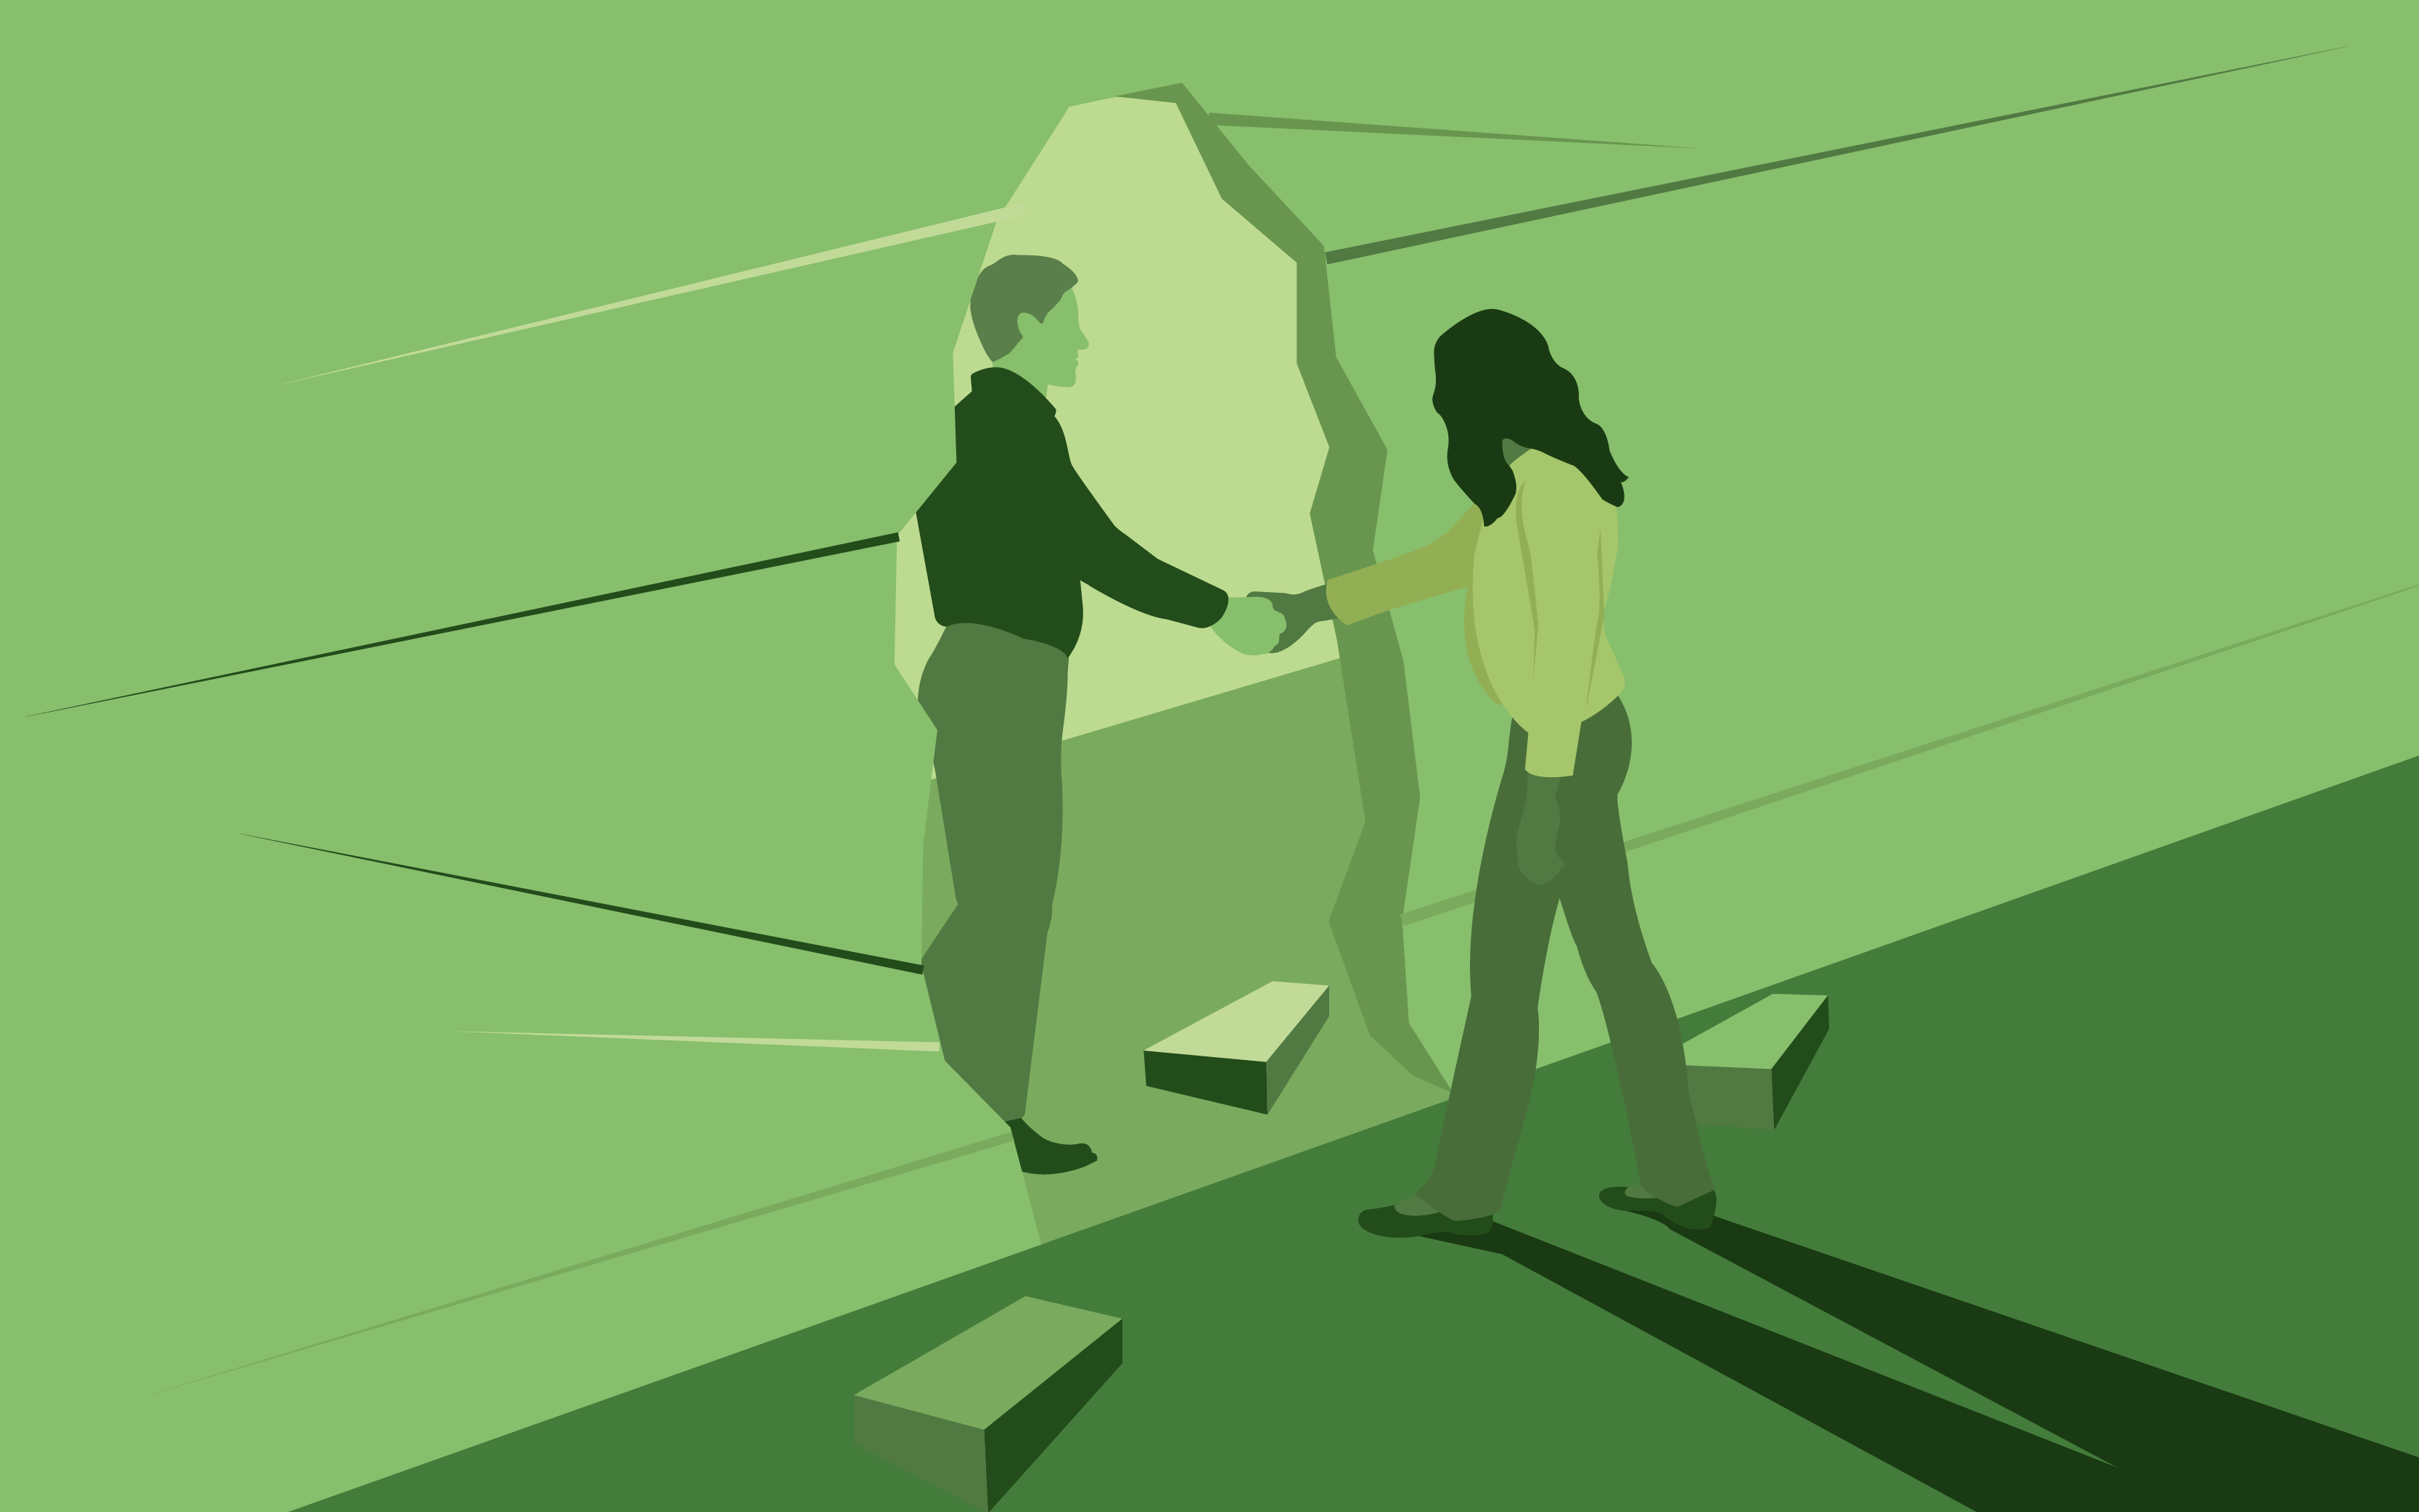 Person reaching through a broken hole in a wall to help another person walk through. Illustration.